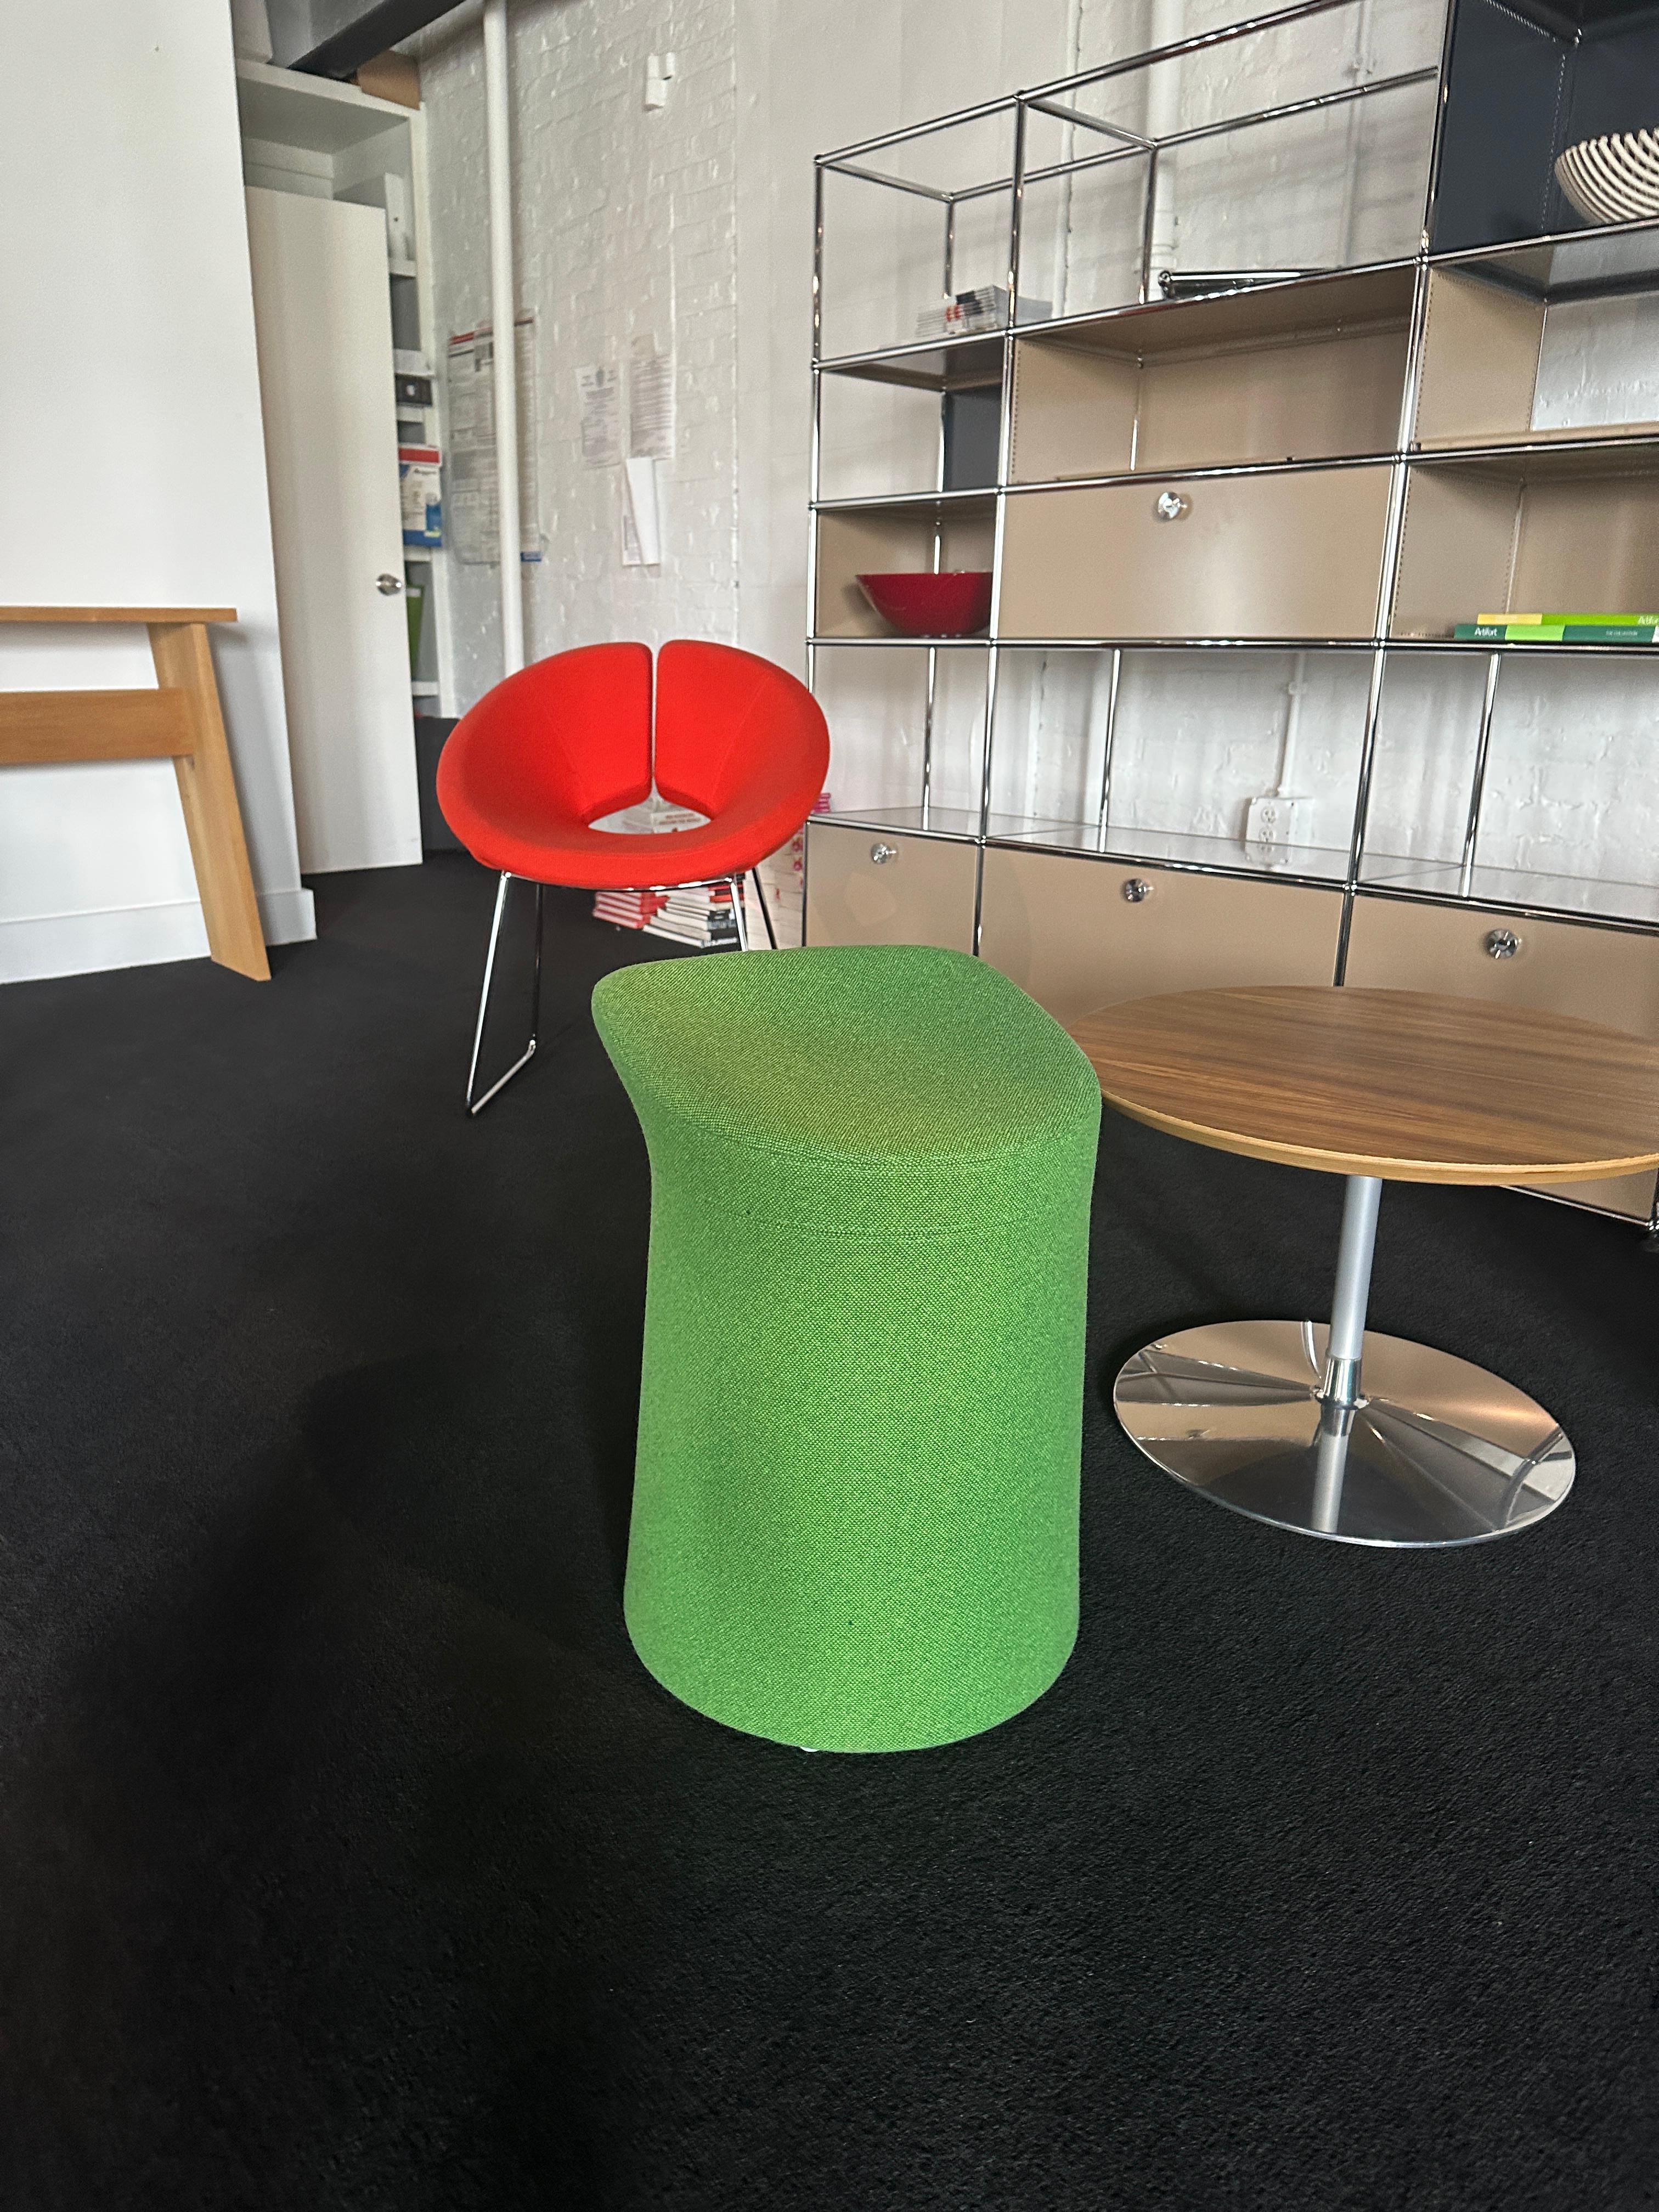 We are very fond of Lilla, the little stool Artifort introduced in 2006. It adds colour and fun to a house or office like no other. Lilla is extremely practical and can be easily double as an extra chair for unexpected dinner guests. Need extra